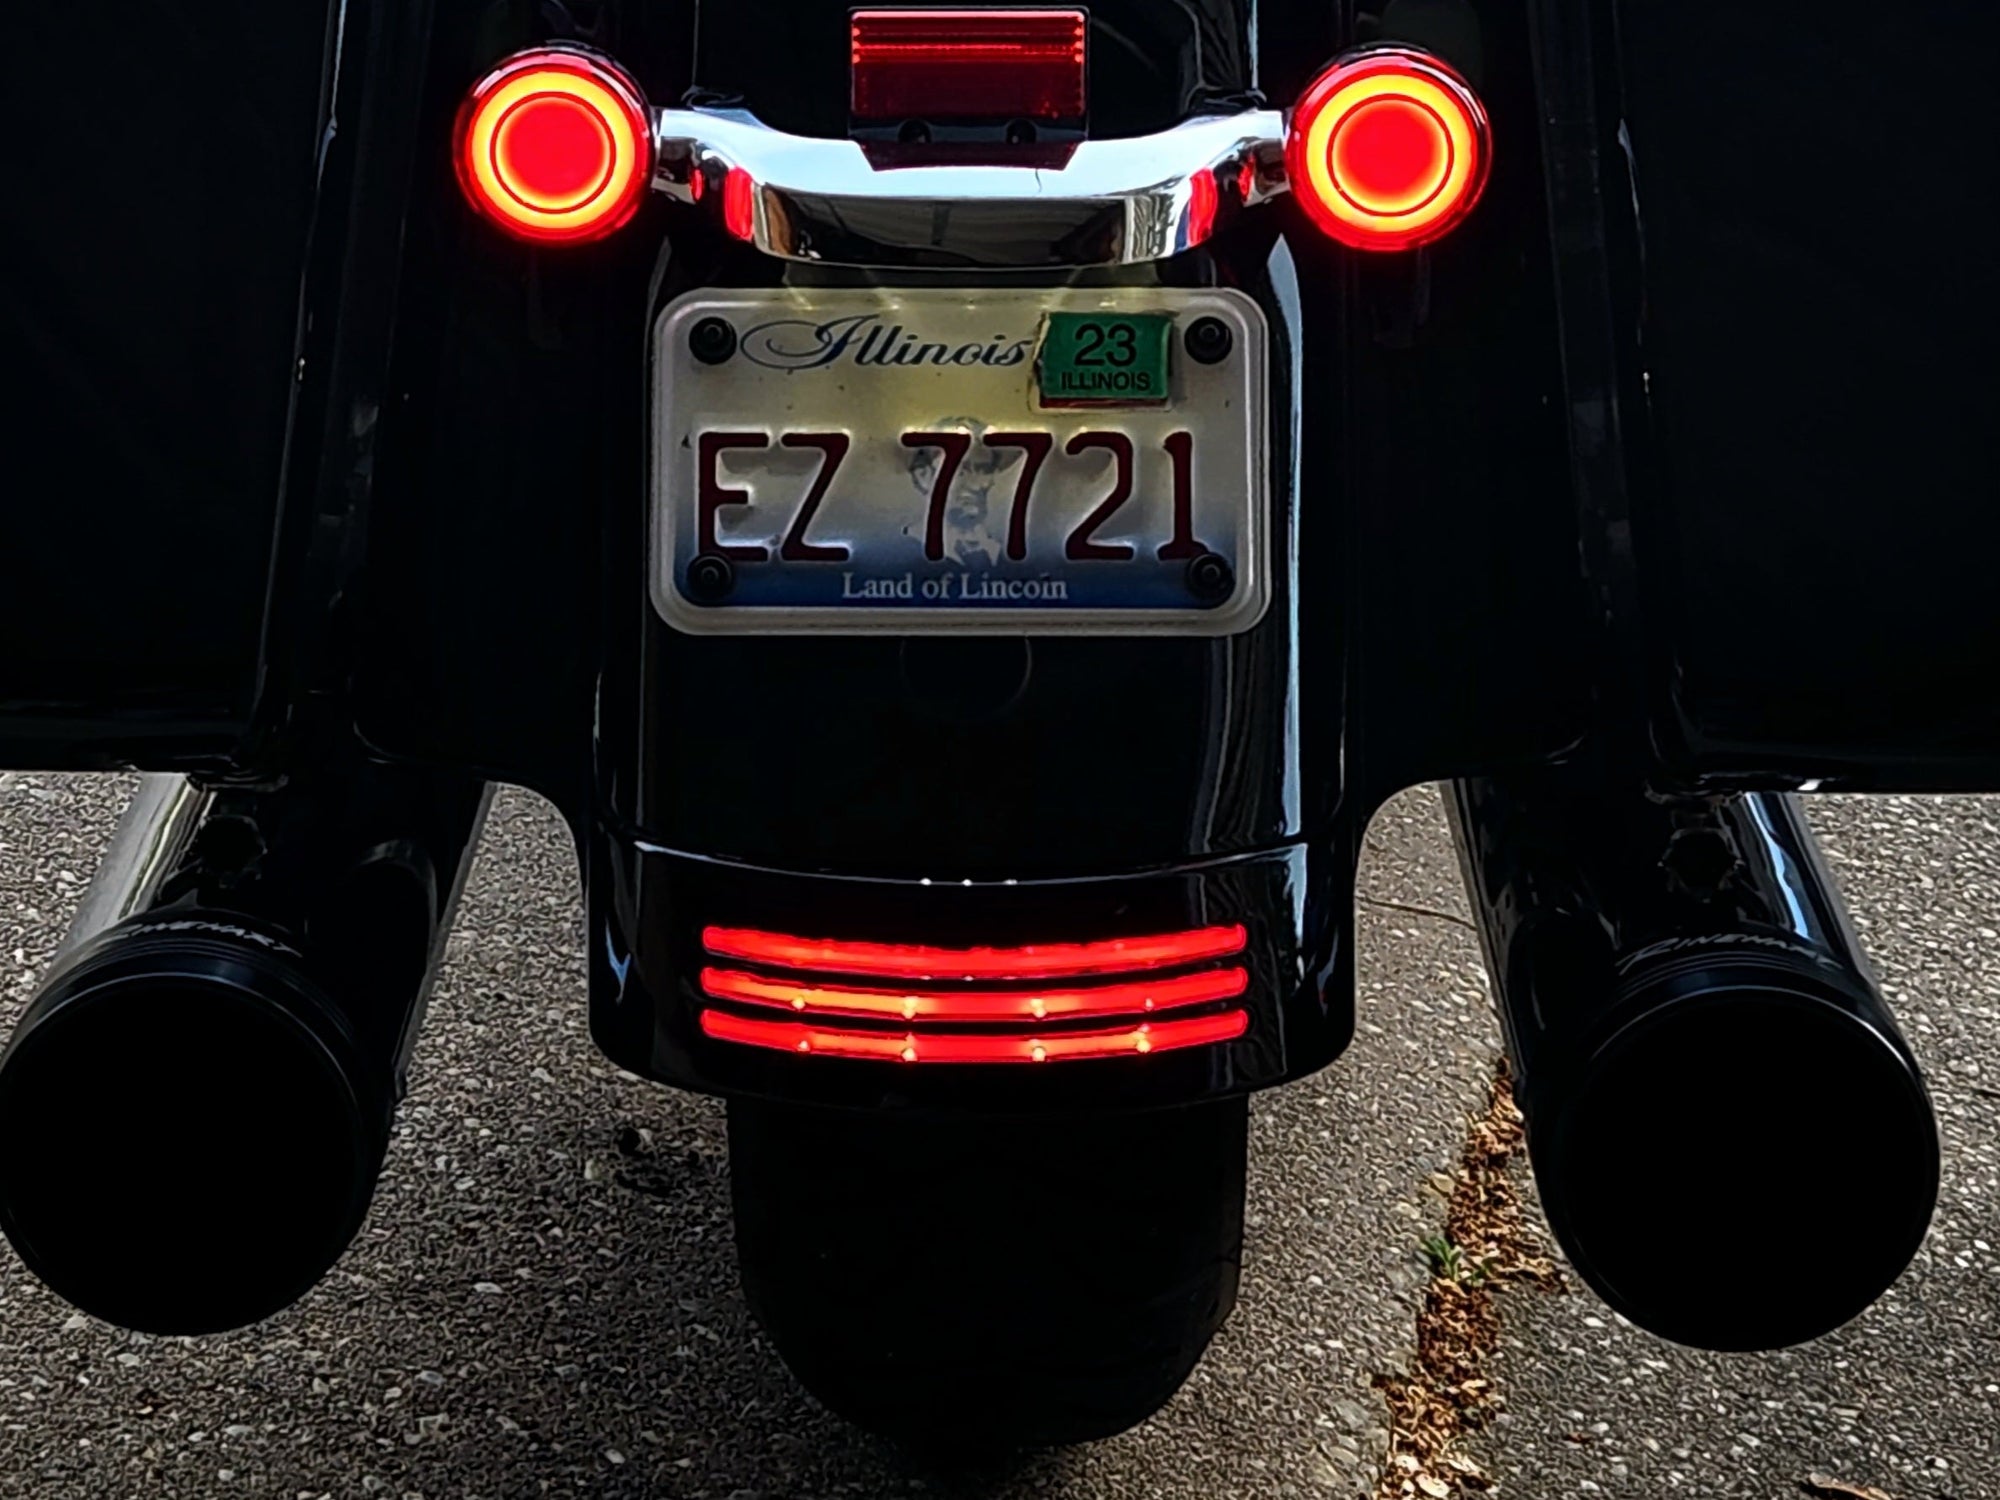 Three Brilliant Ways to Enhance the Rear of Your Harley Davidson Motorcycle